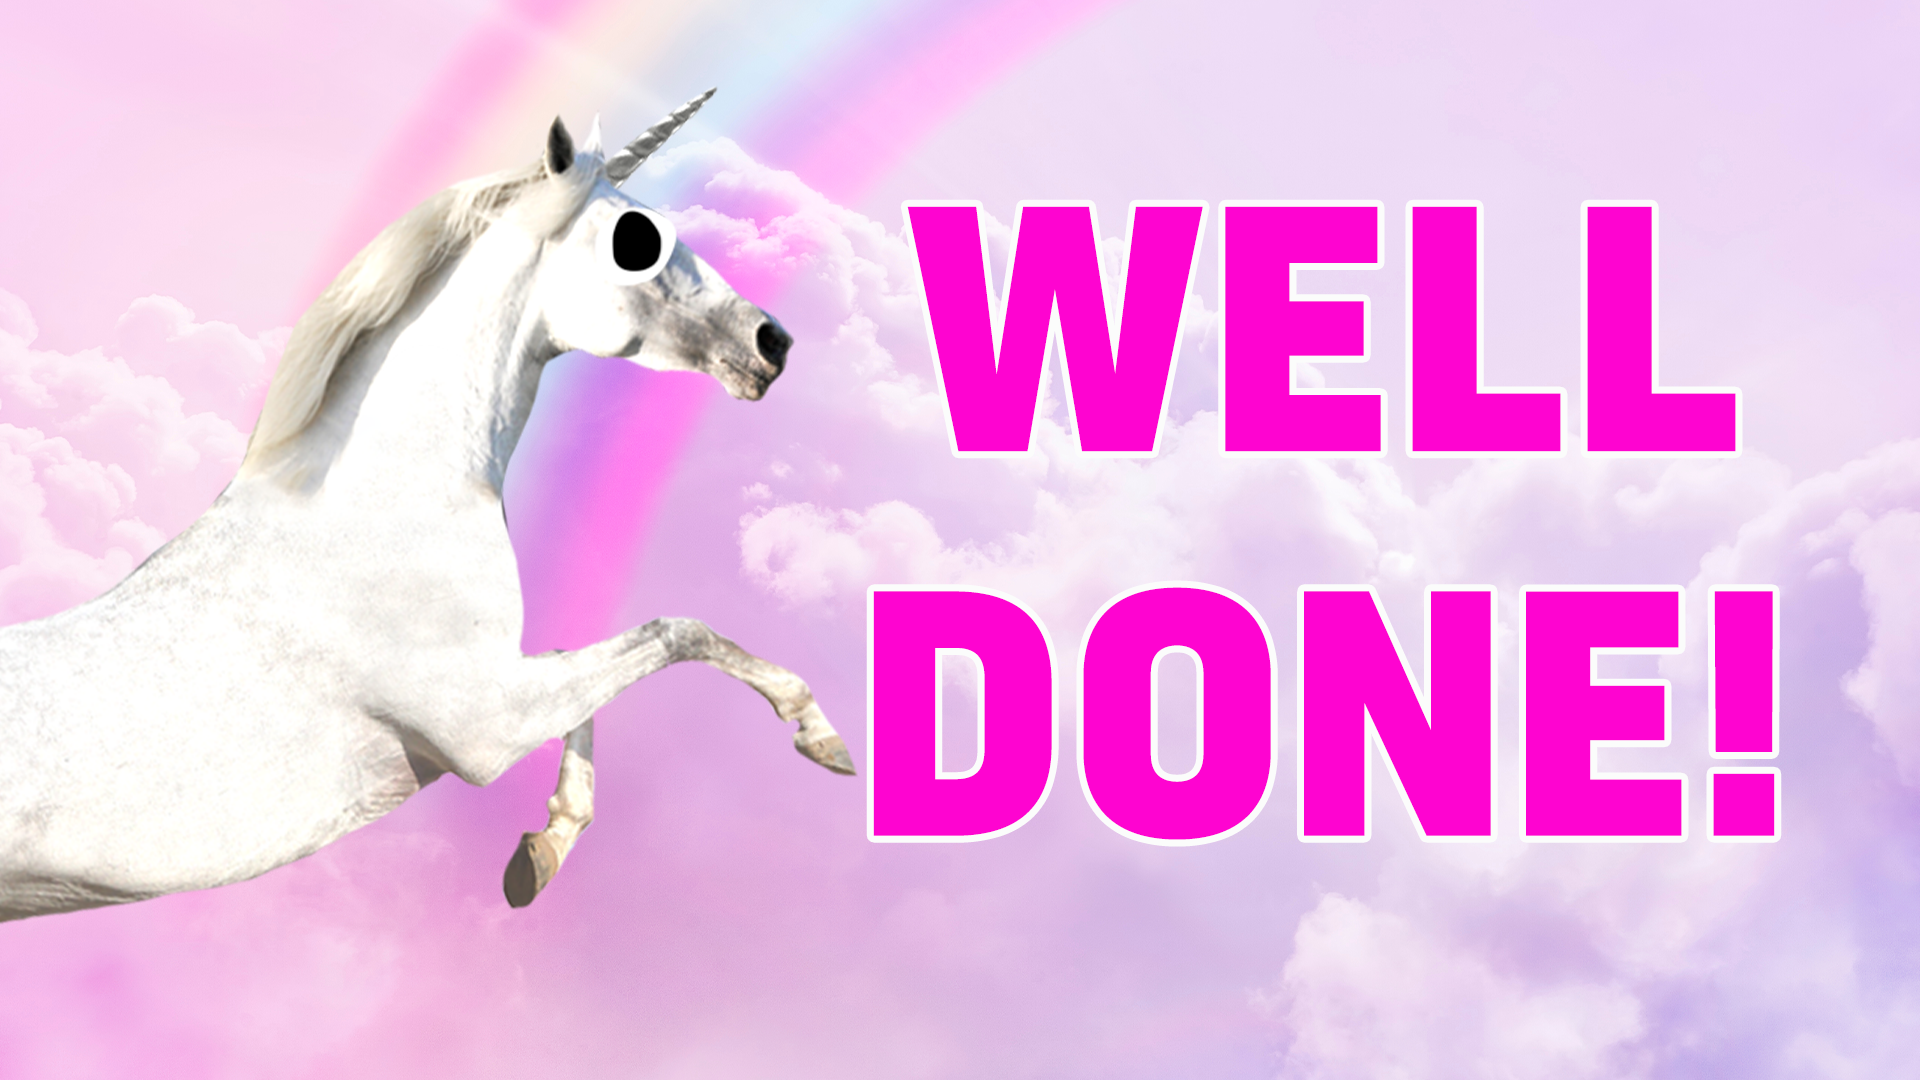 Nice! You obviously love everything Unicorn Academy! Ready to get 100% next time?